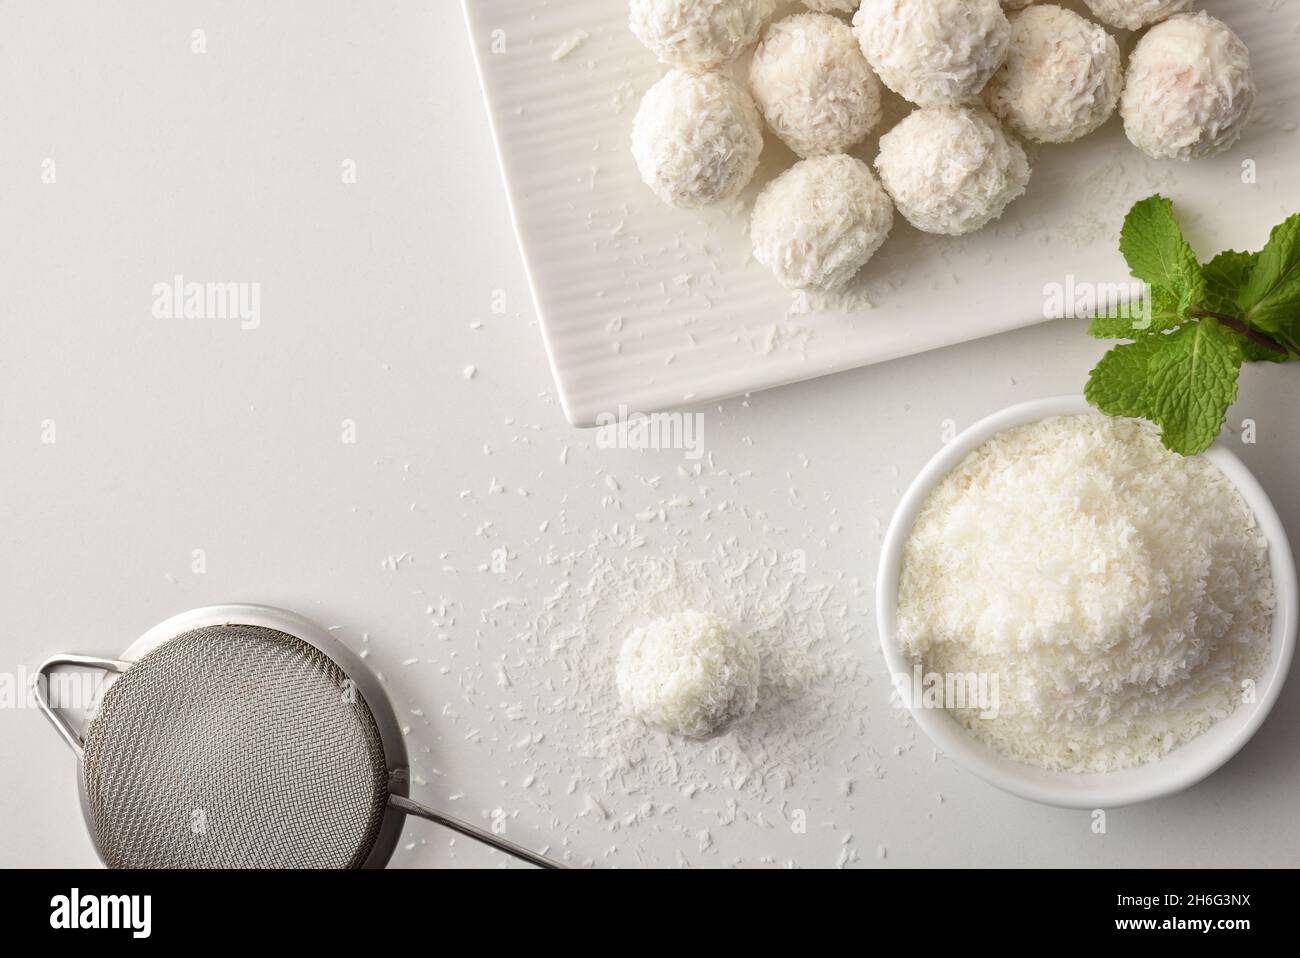 White kitchen table with coconut balls freshly made with bowl with grated coconut and kitchen tools. Top view. Horizontal composition. Stock Photo